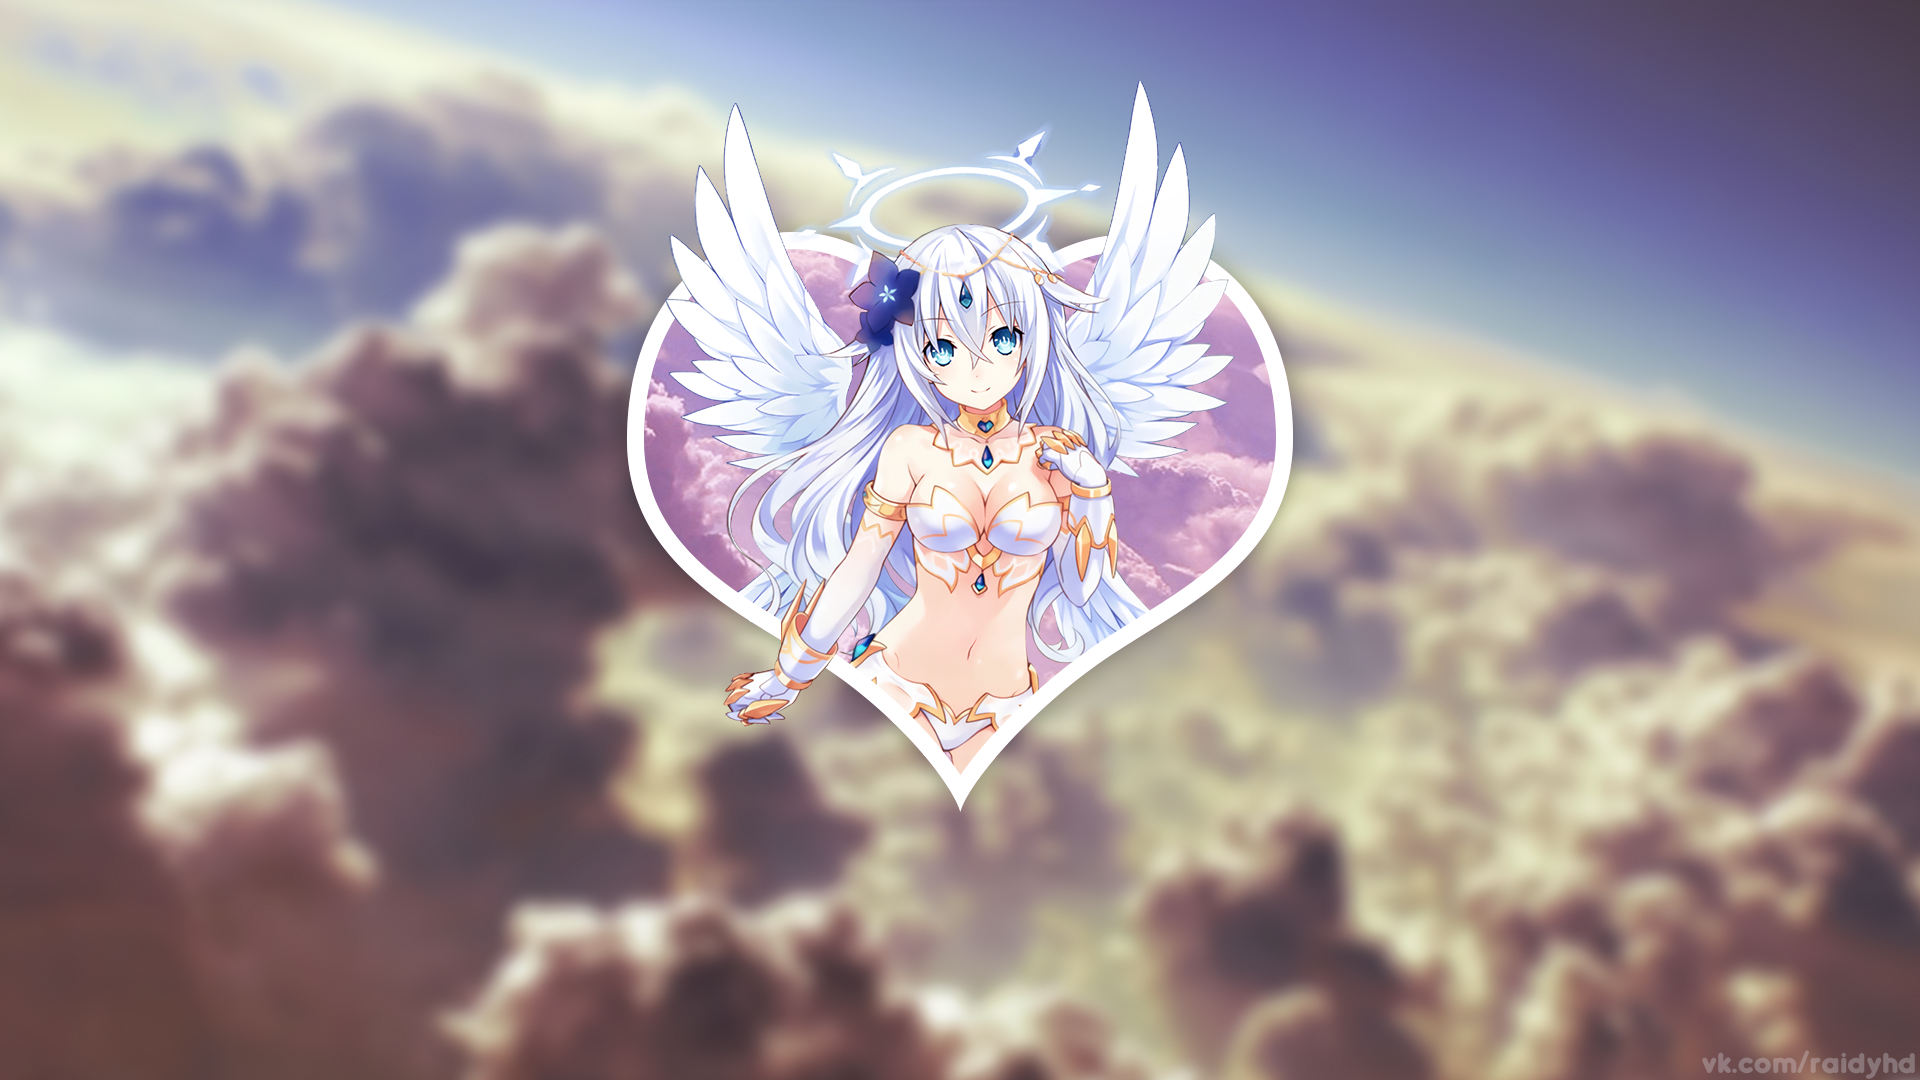 Anime 1920x1080 anime angel clouds heart picture-in-picture angel girl watermarked